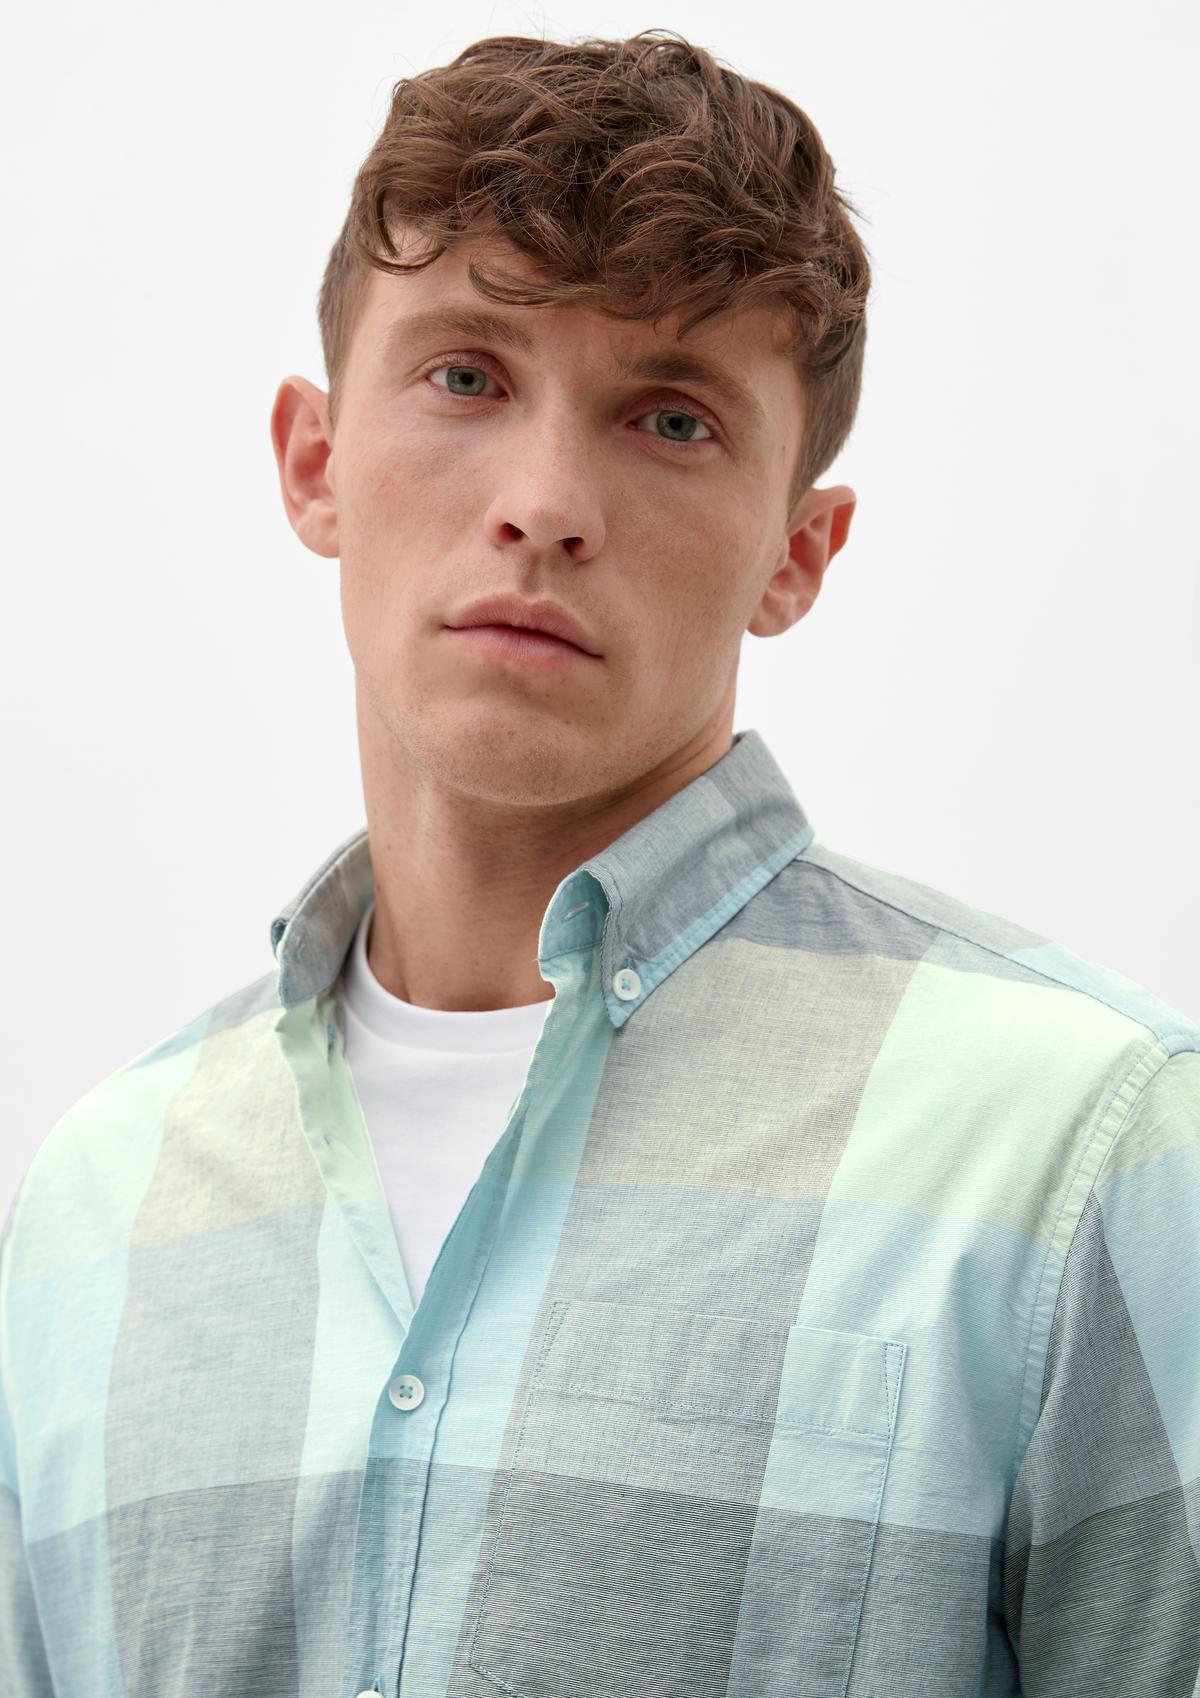 s.Oliver Regular fit: check shirt made of stretch cotton